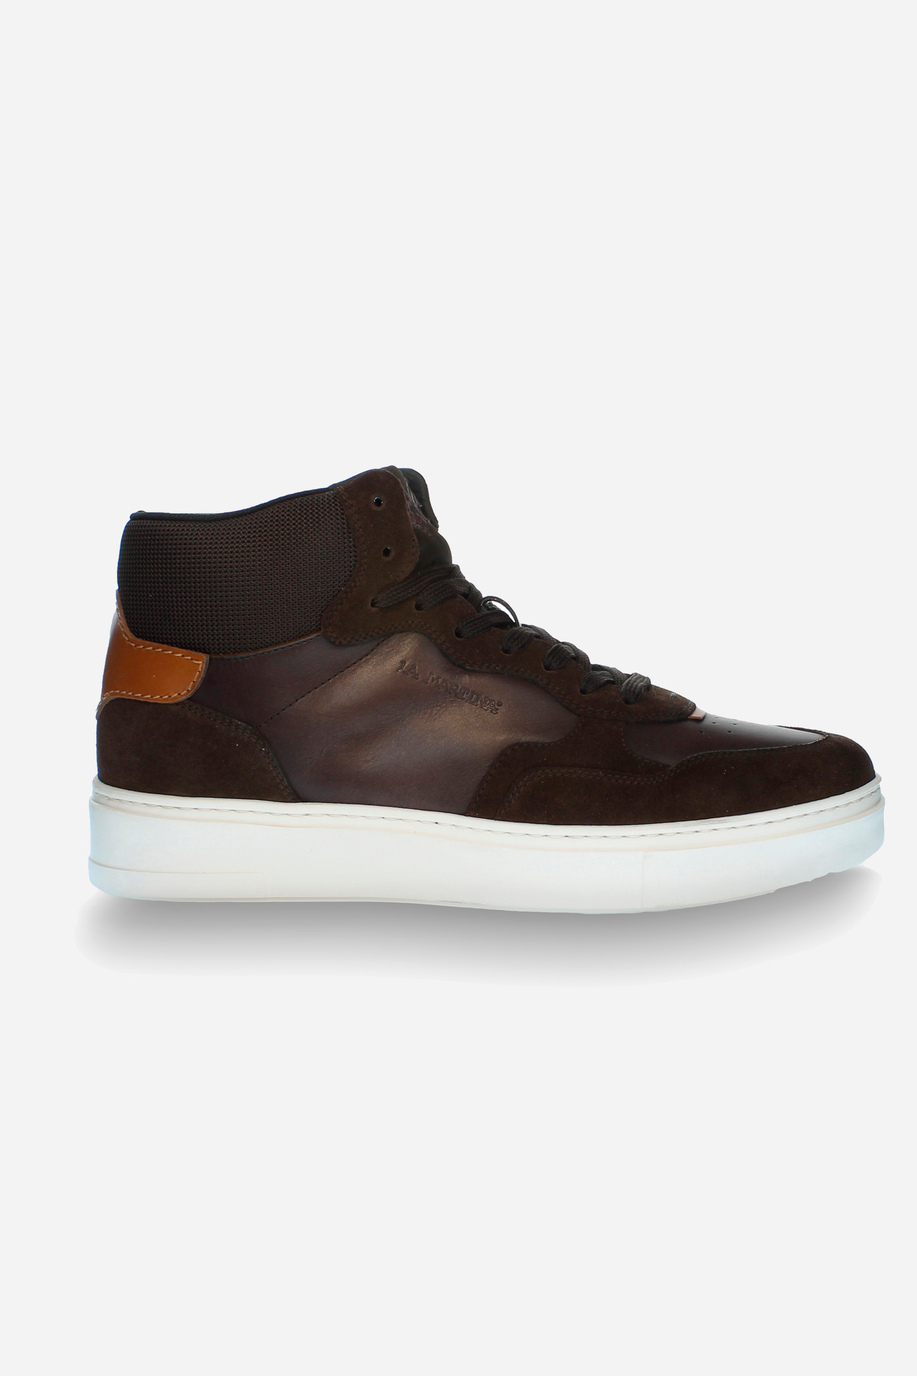 Men leather sneakers mixed suede - Sneakers | La Martina - Official Online Shop